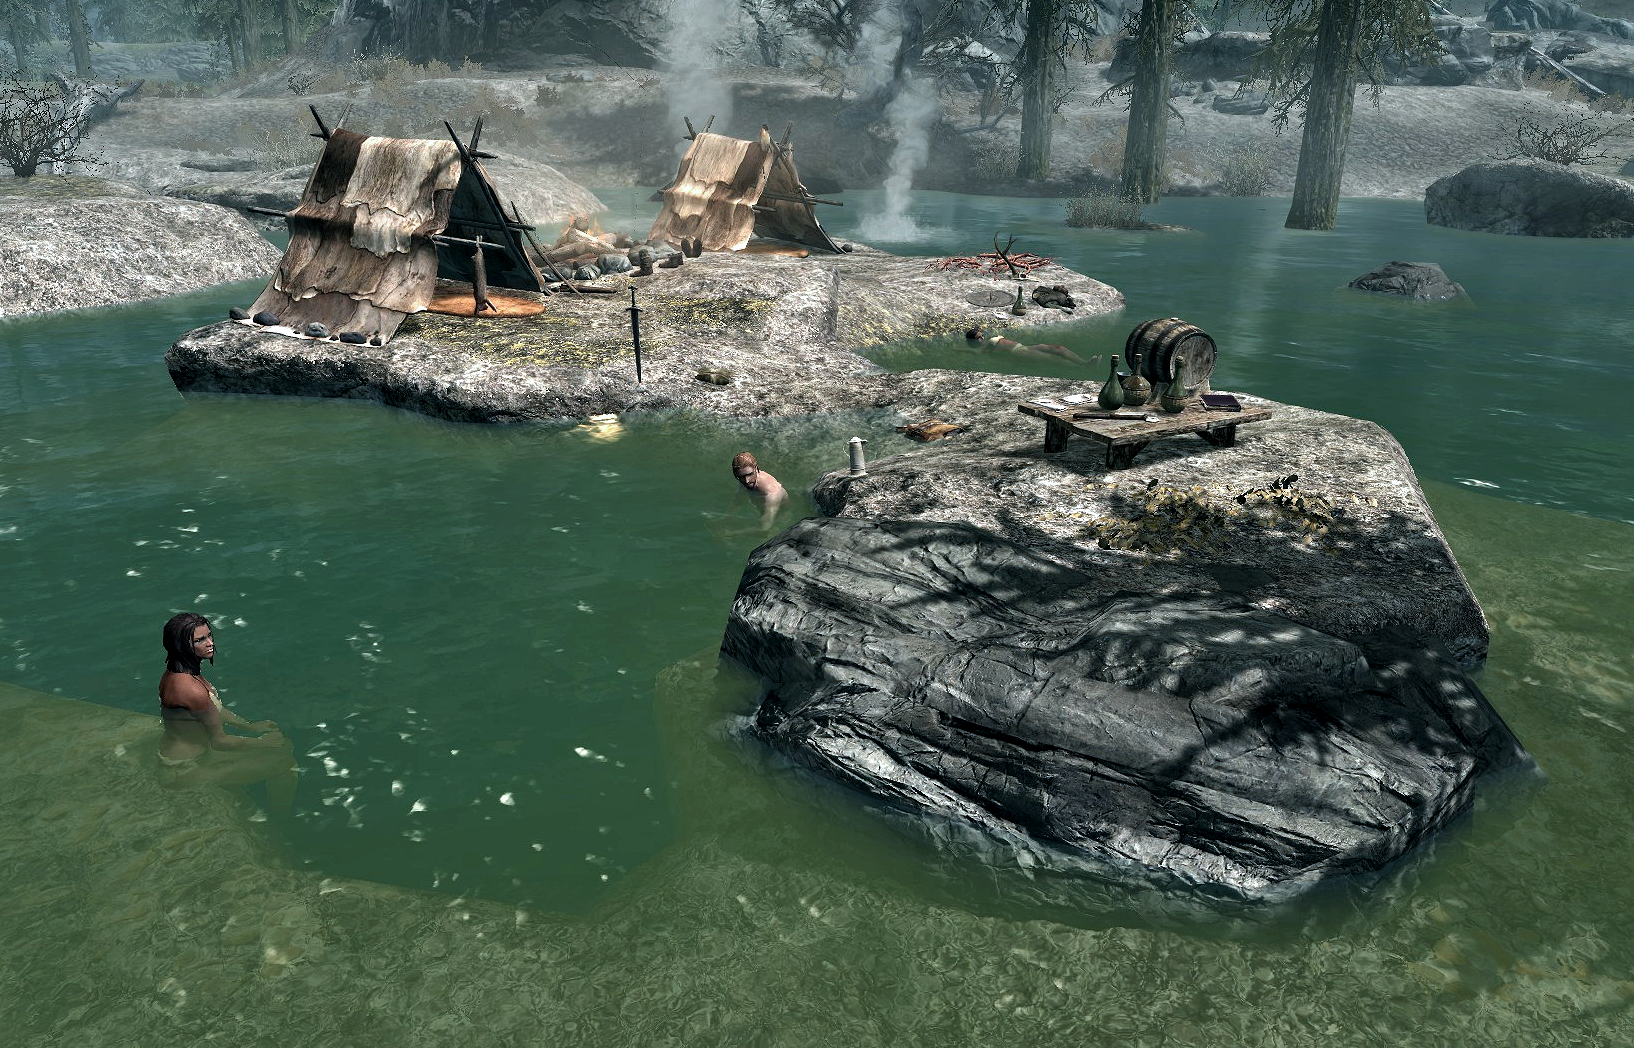 ...it is a hunter's camp with three hunters bathing in the hot springs. 